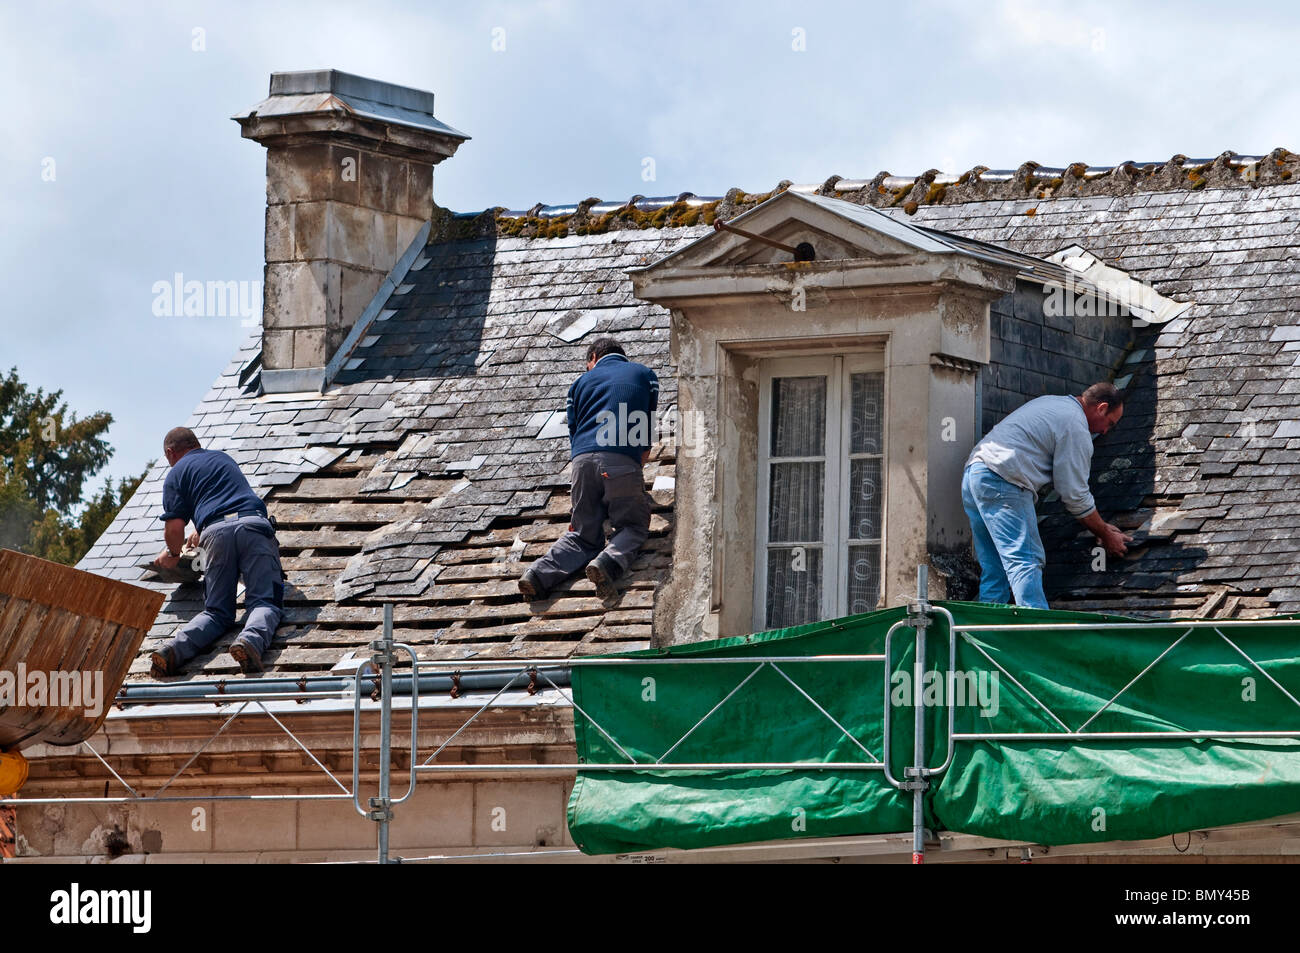 https://c8.alamy.com/comp/BMY45B/workers-on-town-house-roof-removing-old-slates-no-safety-equipment-BMY45B.jpg